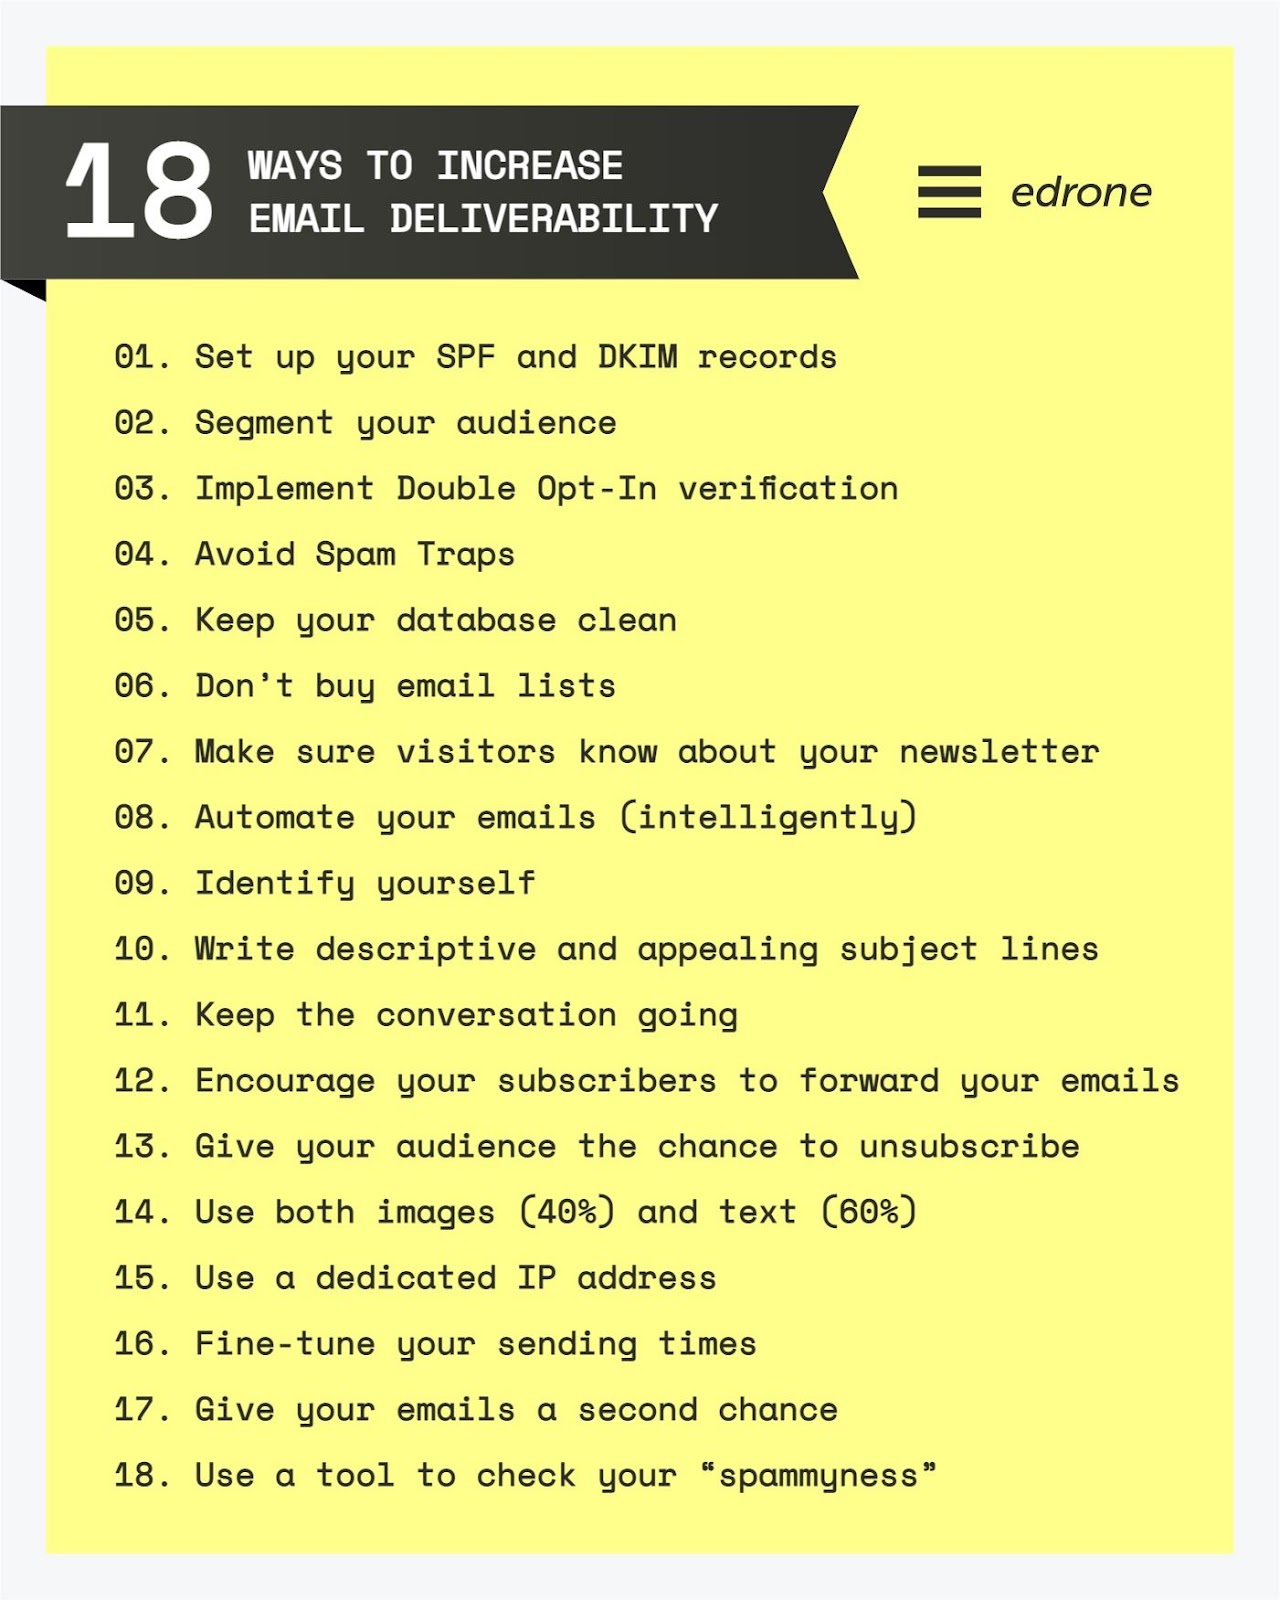 18 ways to increase email deliverability